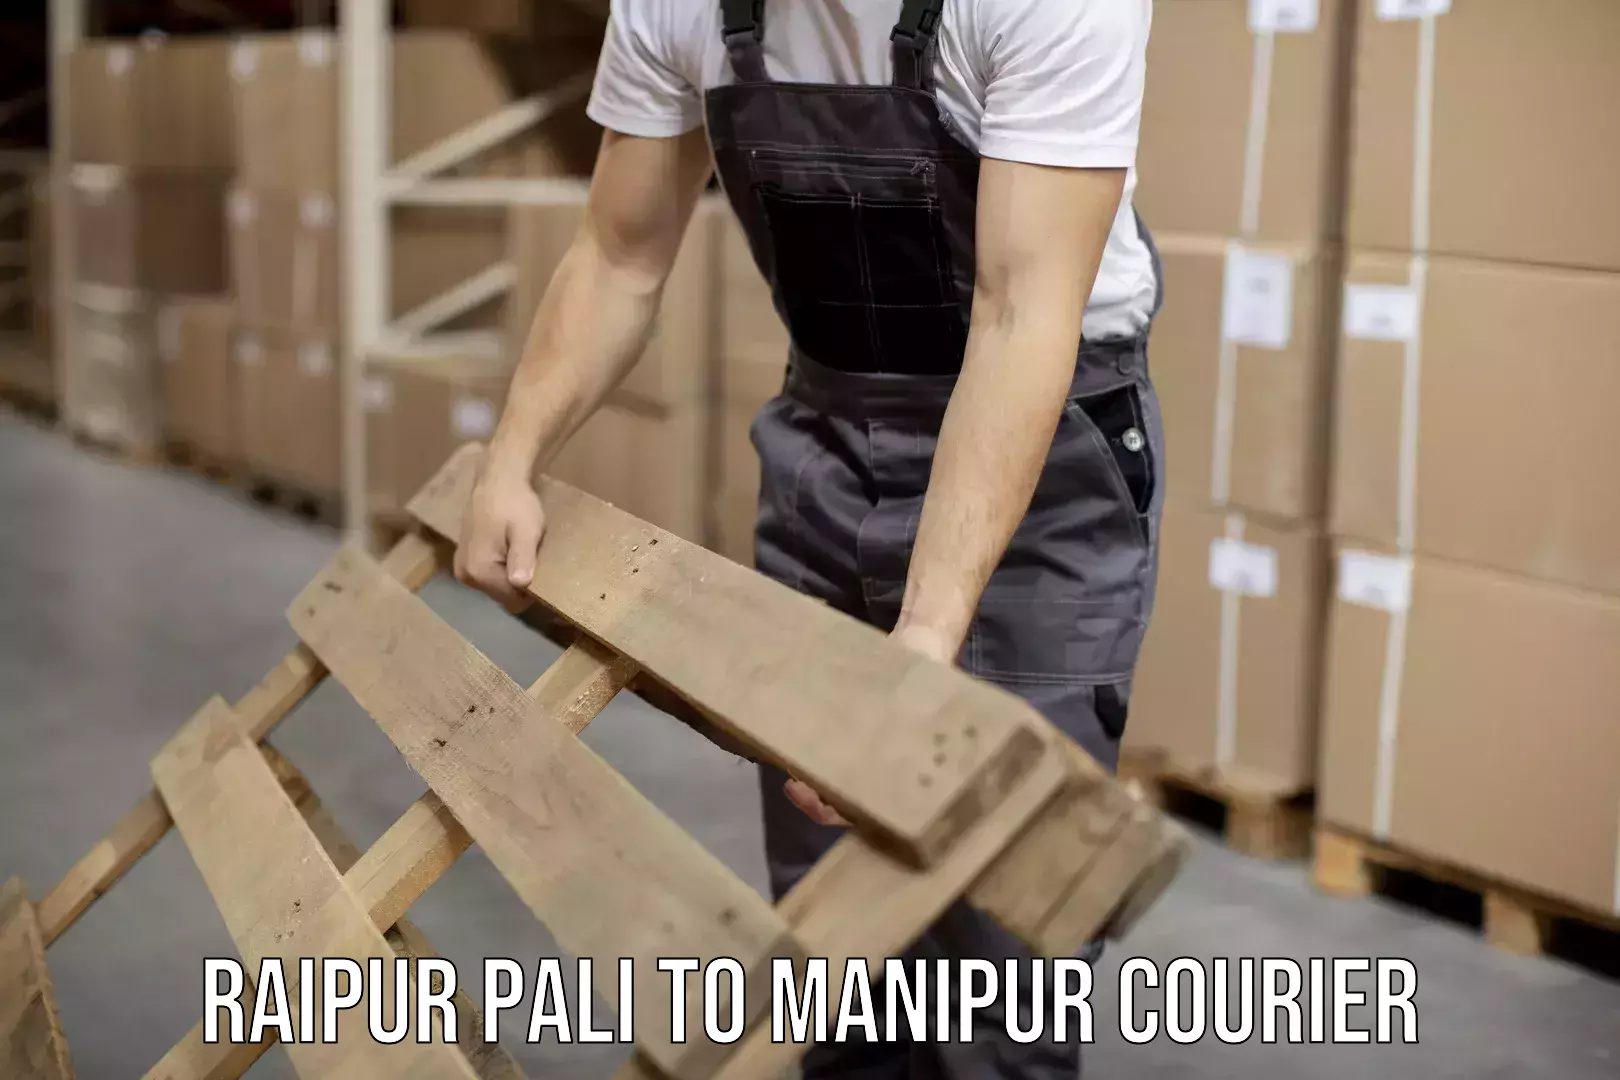 Global shipping solutions Raipur Pali to Manipur